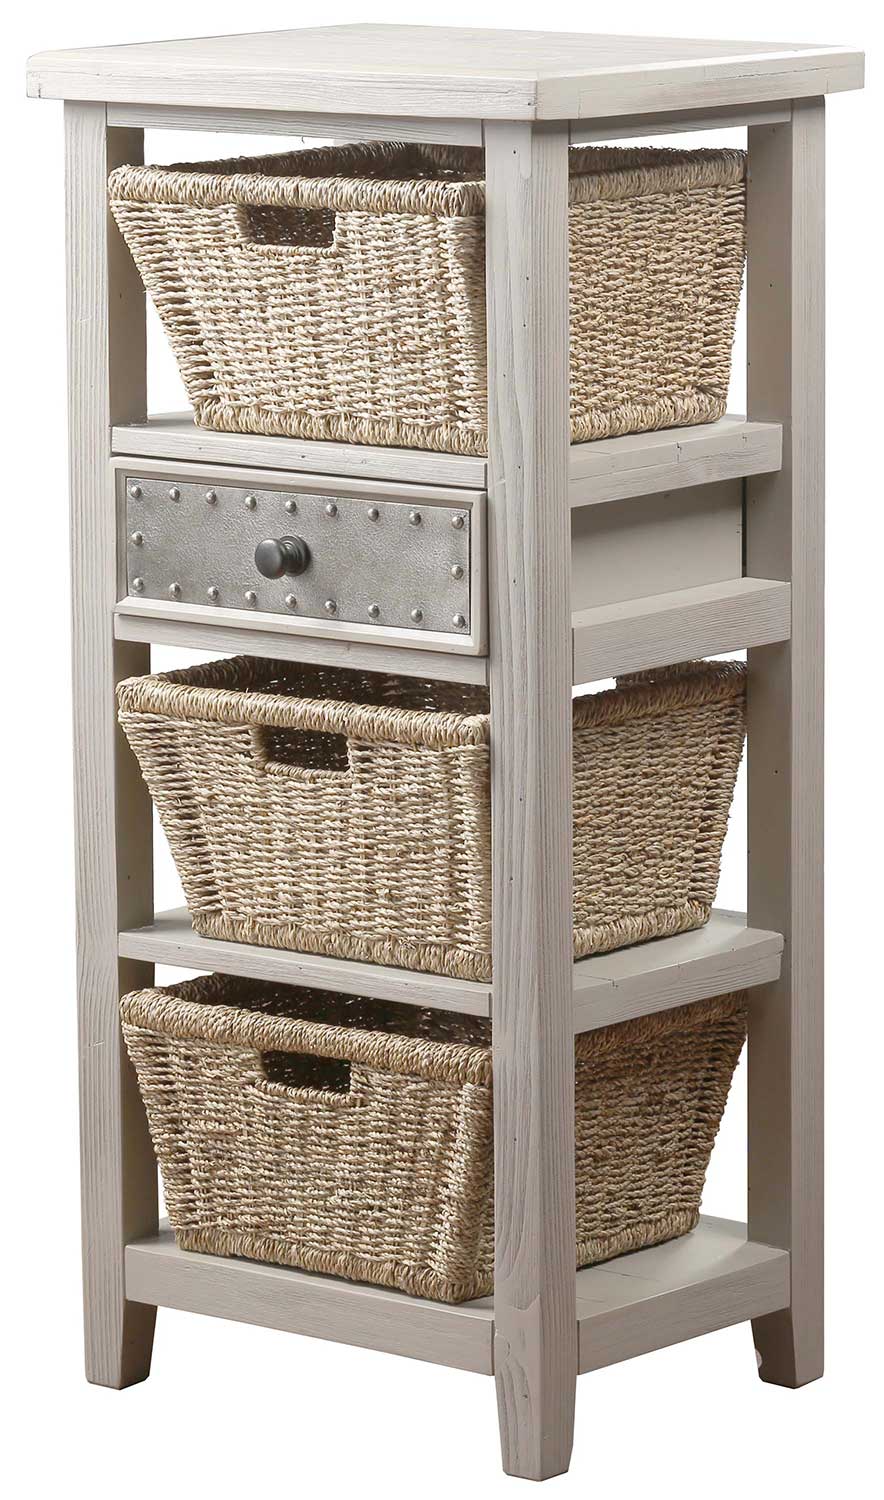 Hillsdale Tuscan Retreat Basket Stand with 3-Basket - Taupe